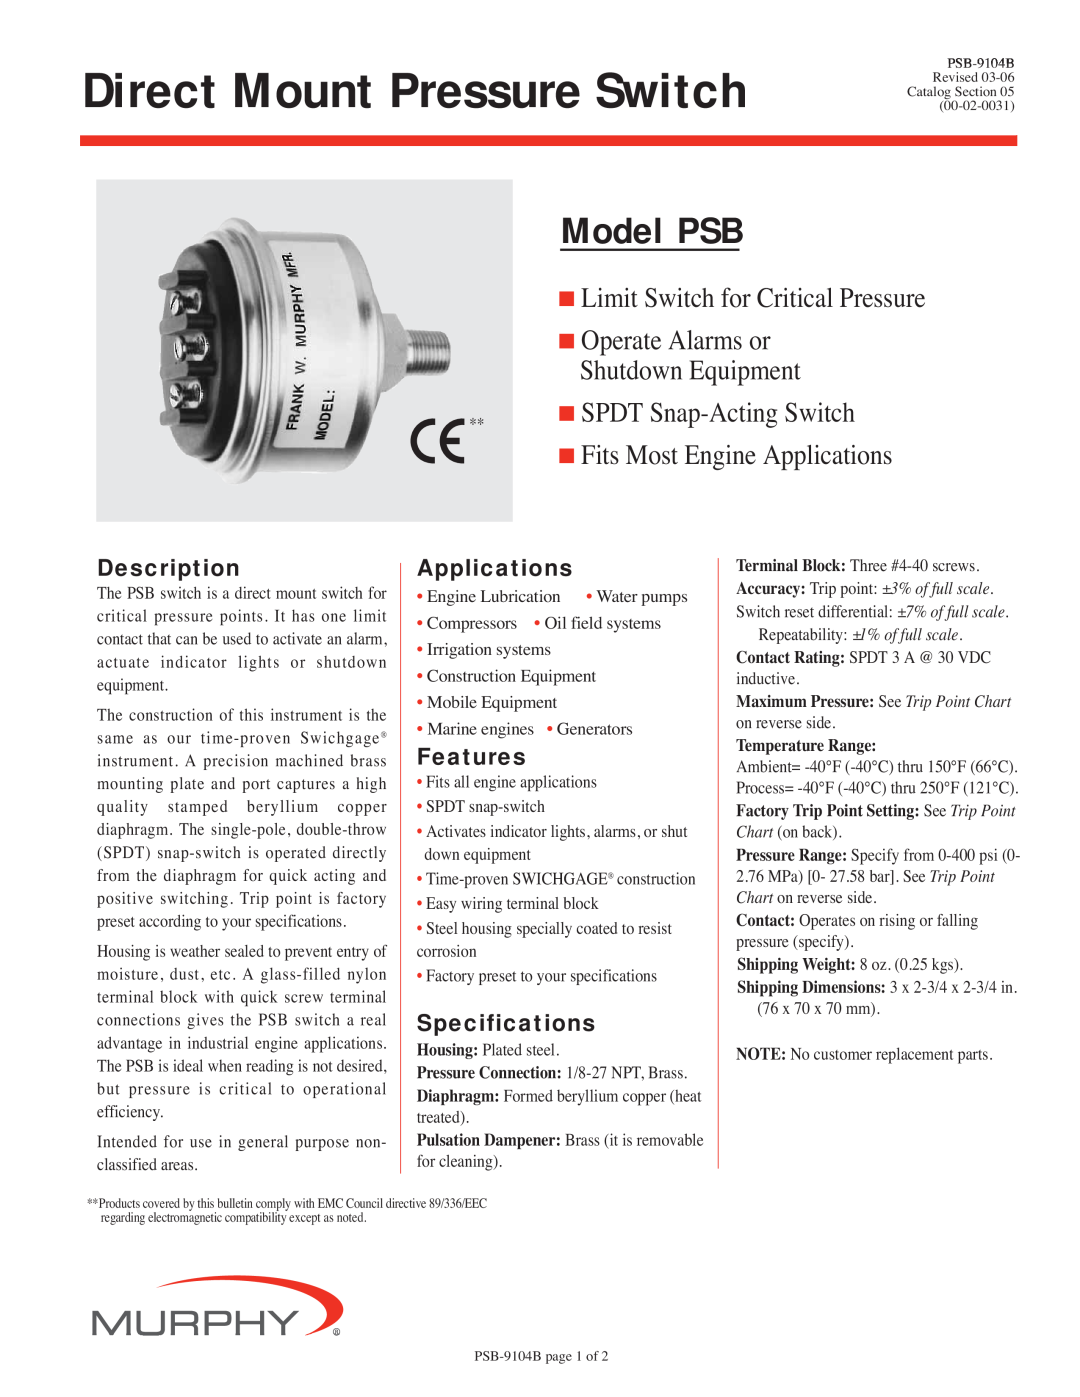 Murphy specifications Description, Applications, Features, Specifications, Direct Mount Pressure Switch, Model PSB 